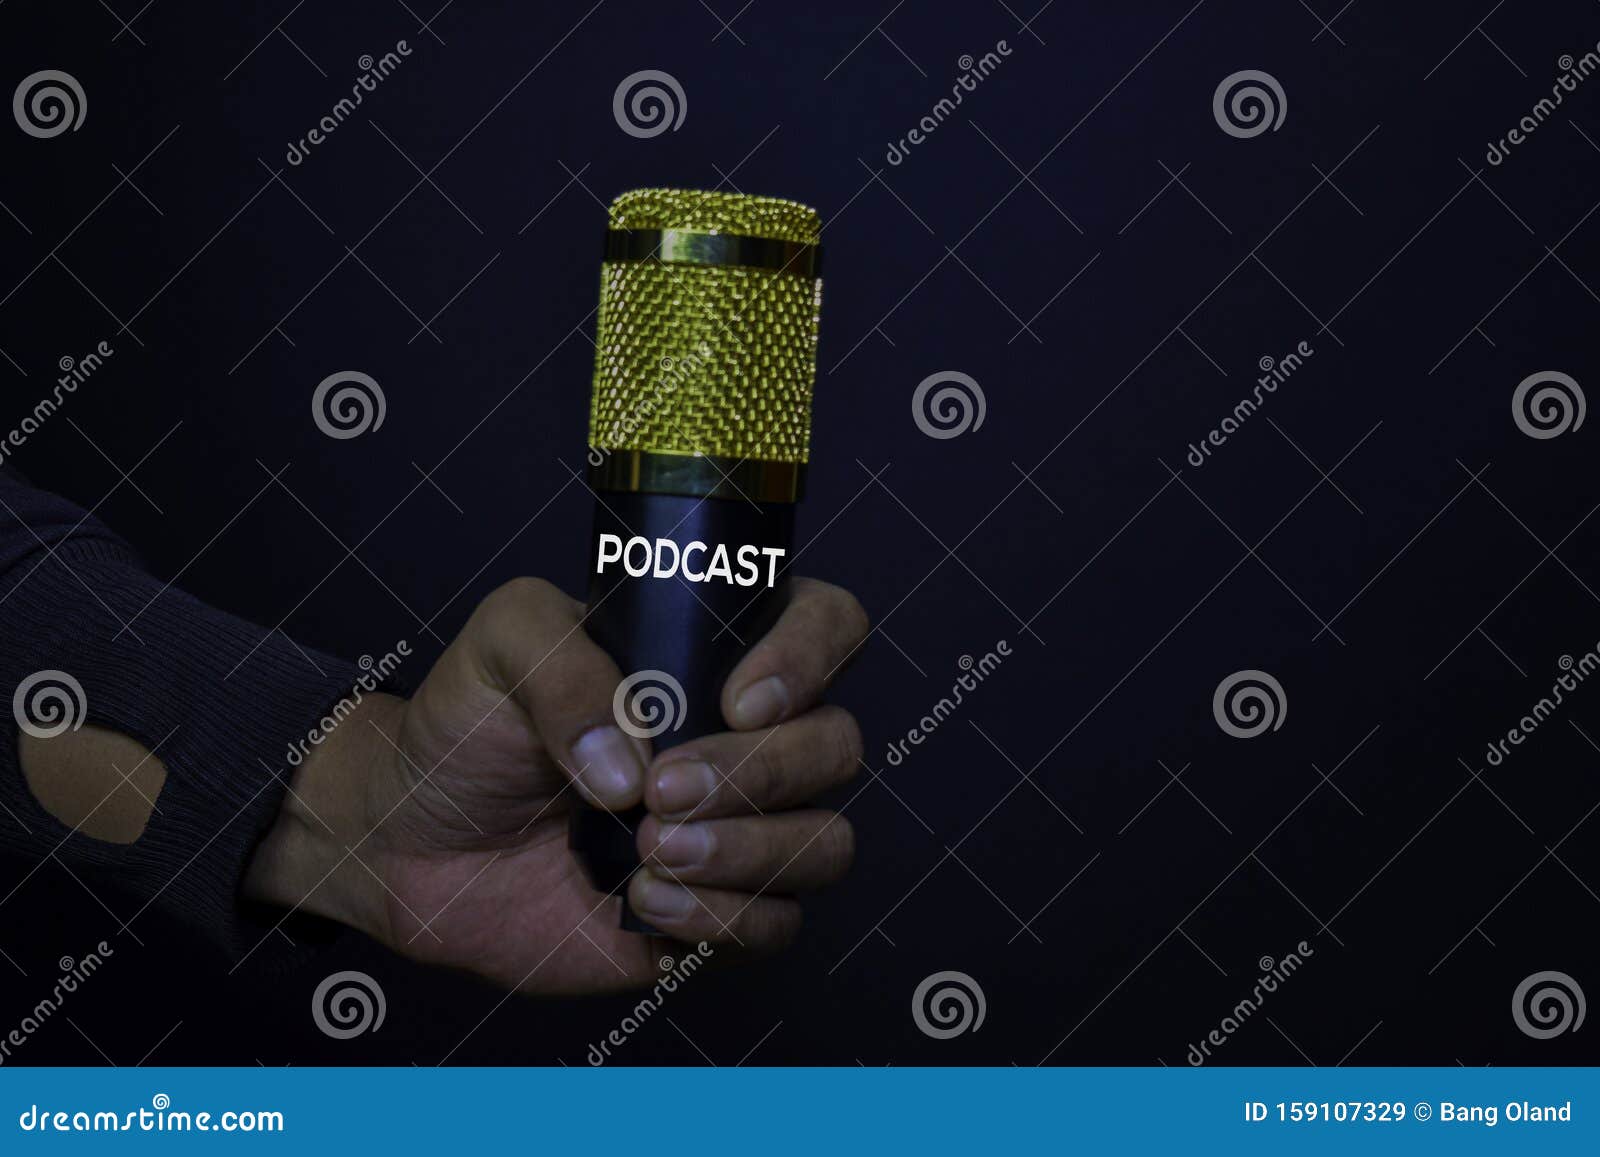 profesional microphone on hands  black background. podcast concept